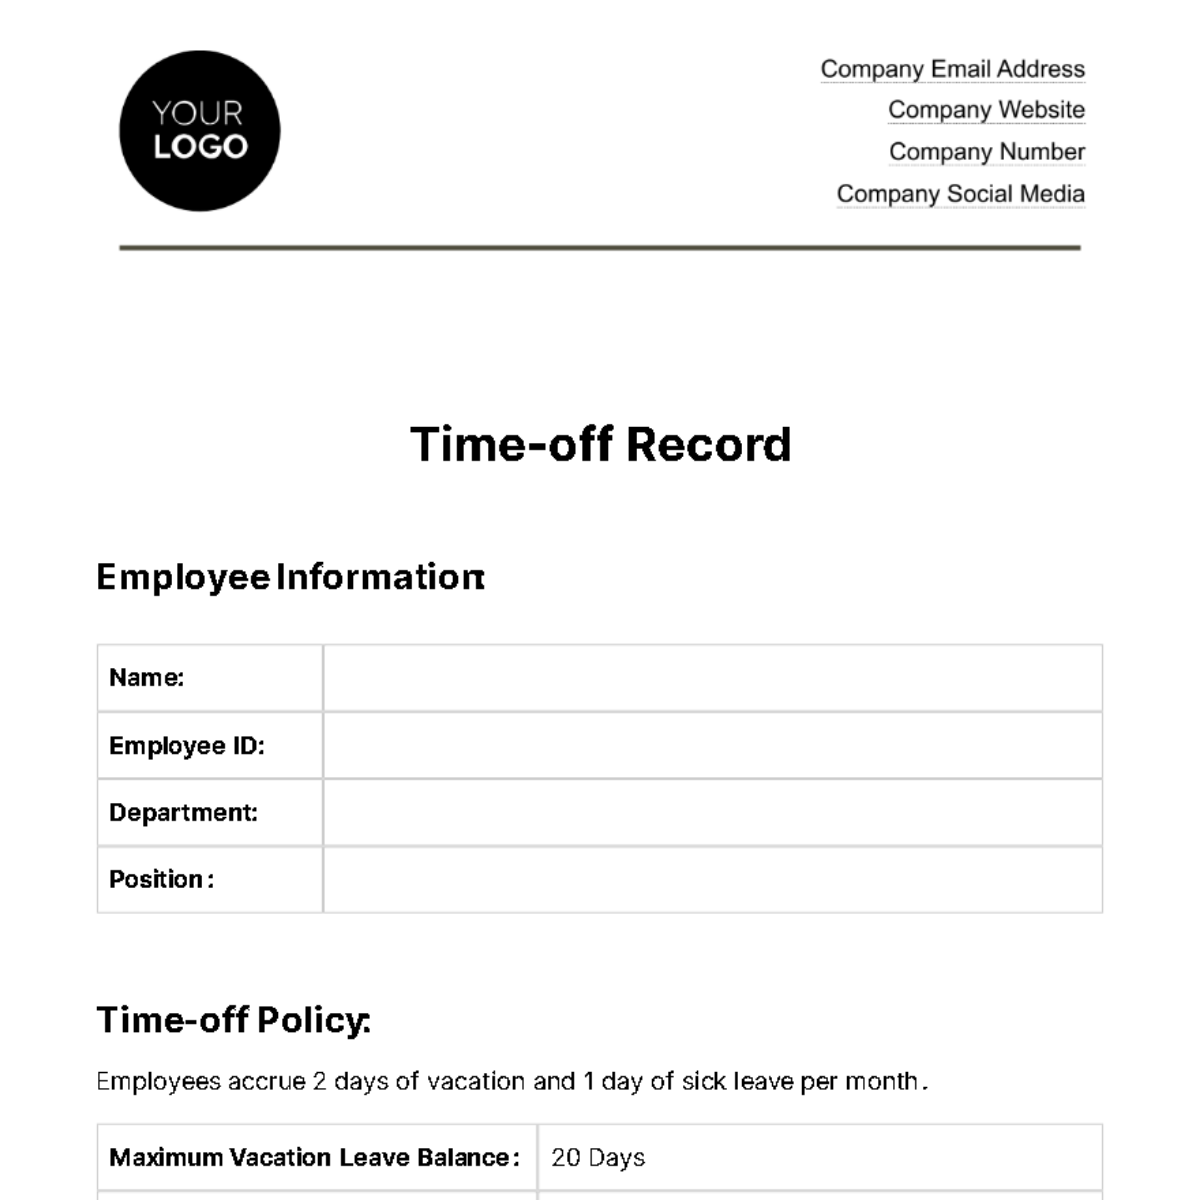 Free Time-off Record HR Template